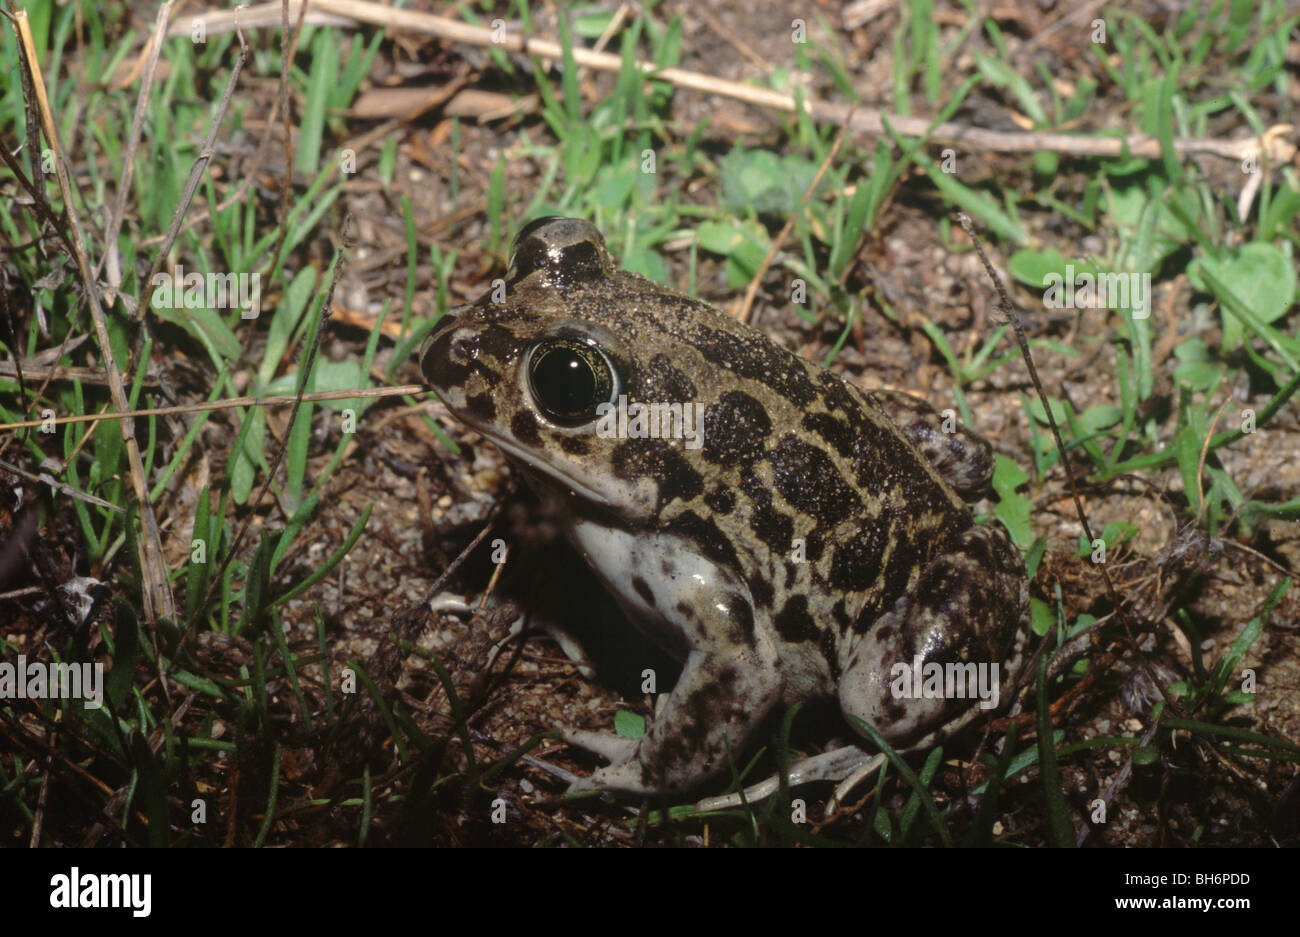 Western Spadefoot toad (Pelobates cultripes) Stock Photo